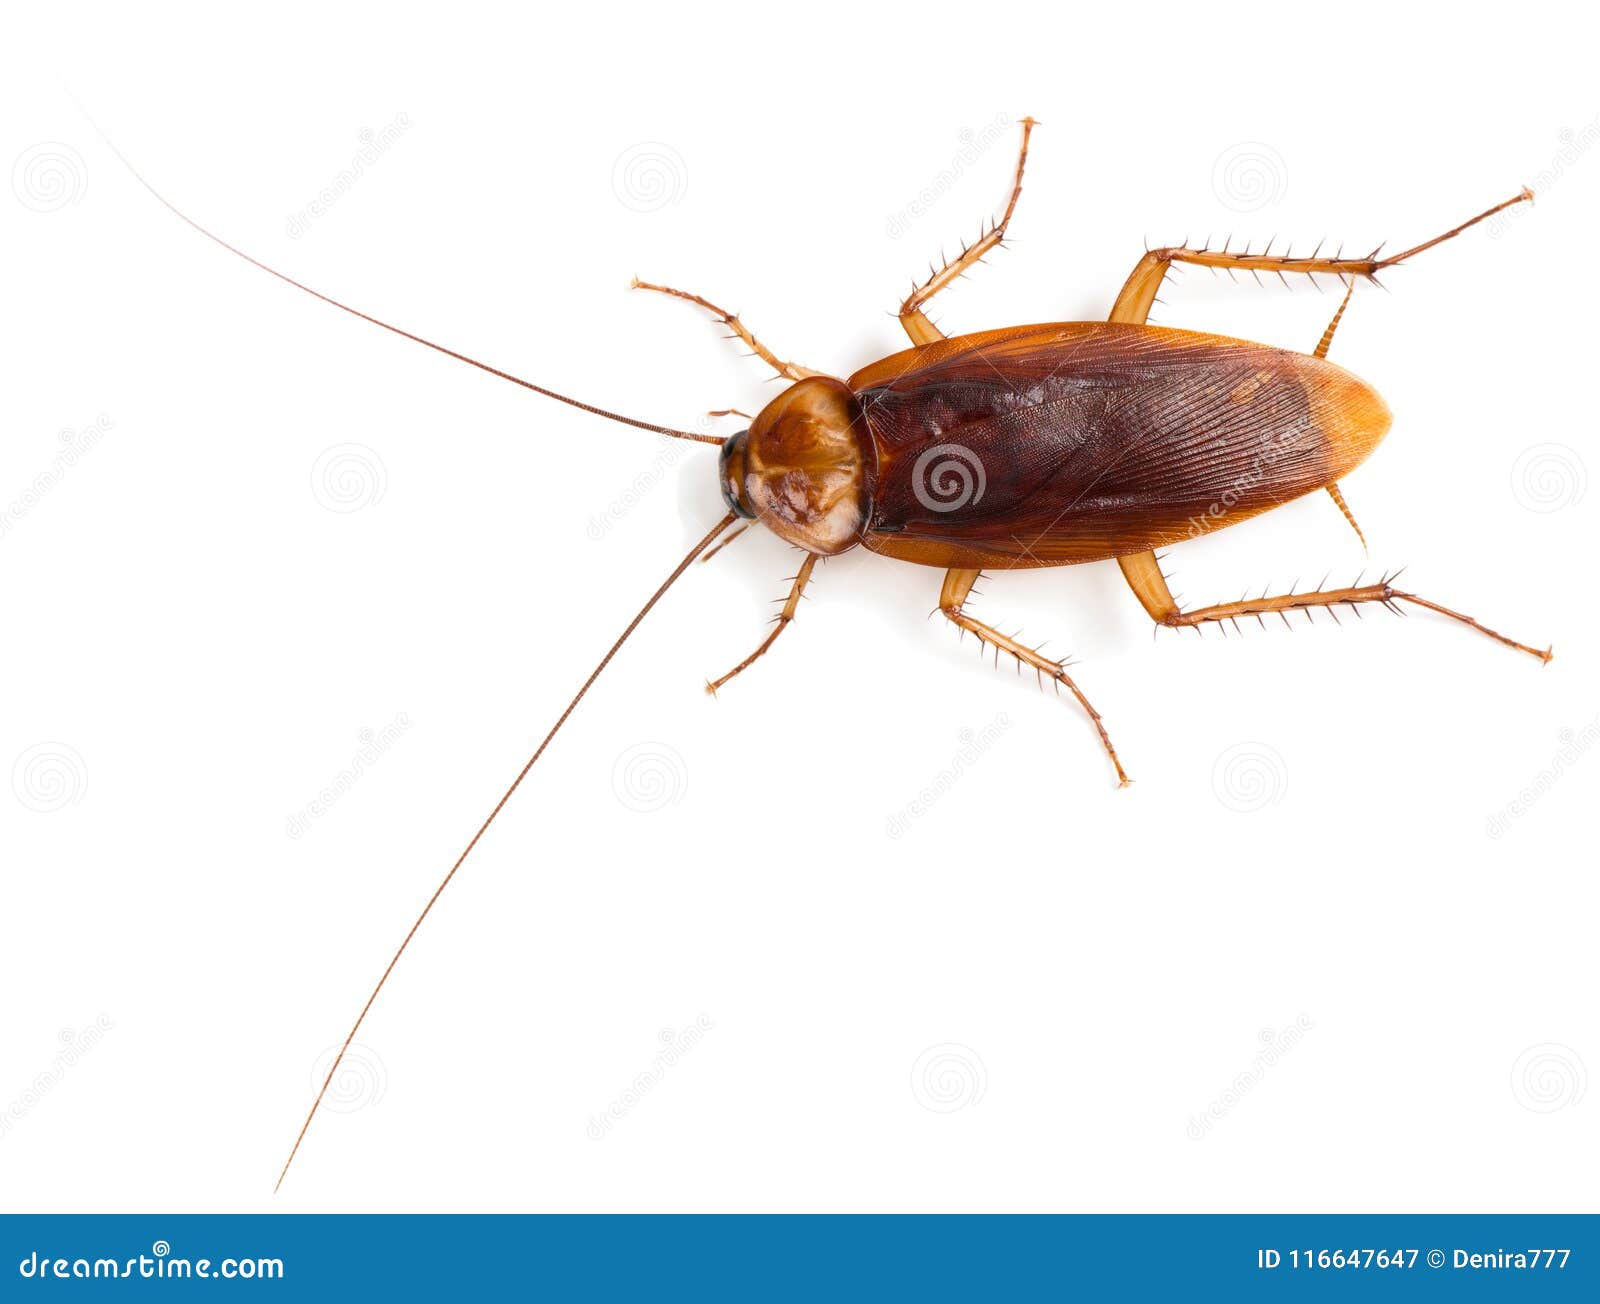 view from above of american cockroach.